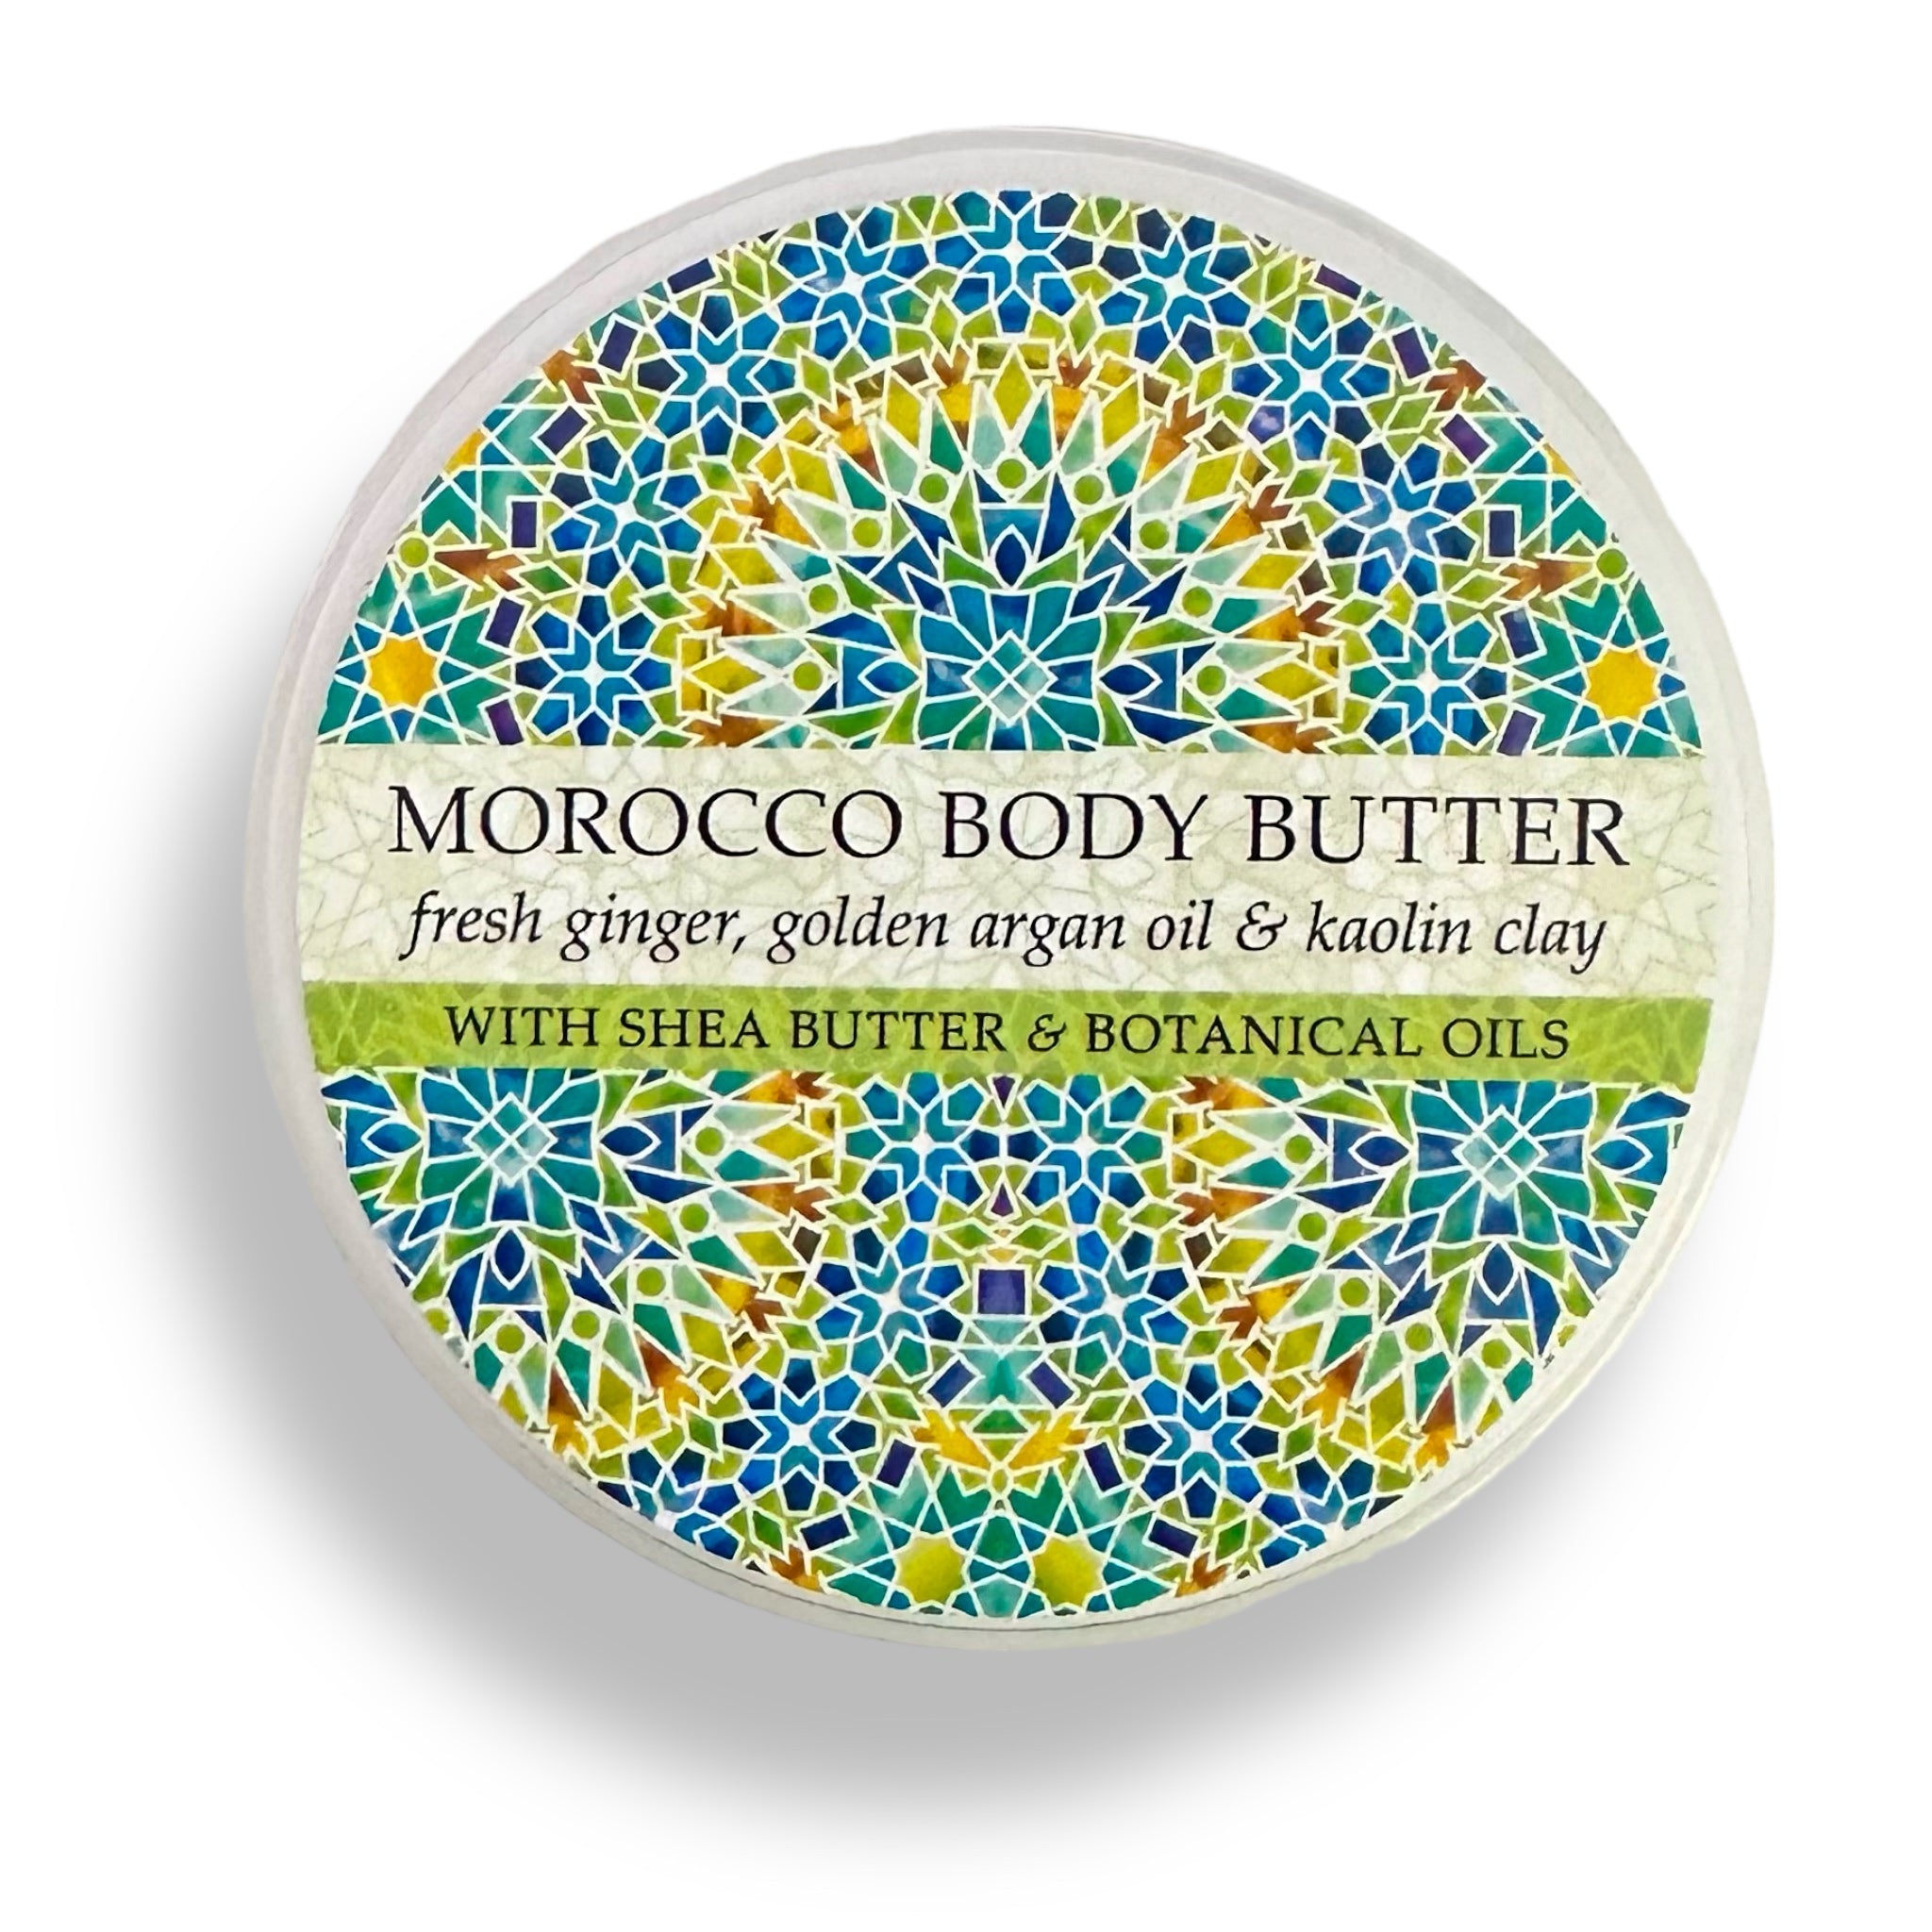 Greenwich Bay Trading Company MOROCCO  Ginger + Argan Oil + Kaolin Clay BODY BUTTER